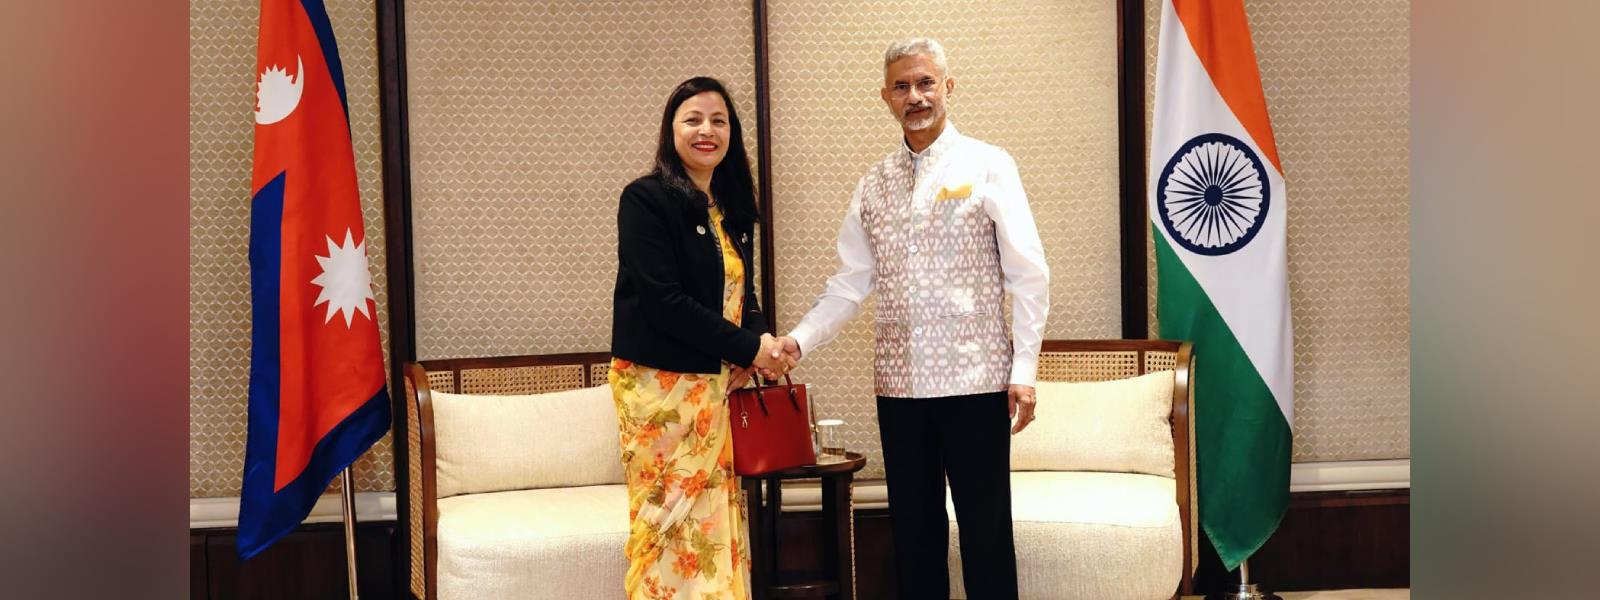 External Affairs Minister Dr. S. Jaishankar met H.E. Ms. Sewa Lamsal, Foreign Secretary of Nepal on the sidelines of BIMSTEC Foreign Ministers’ Retreat in New Delhi